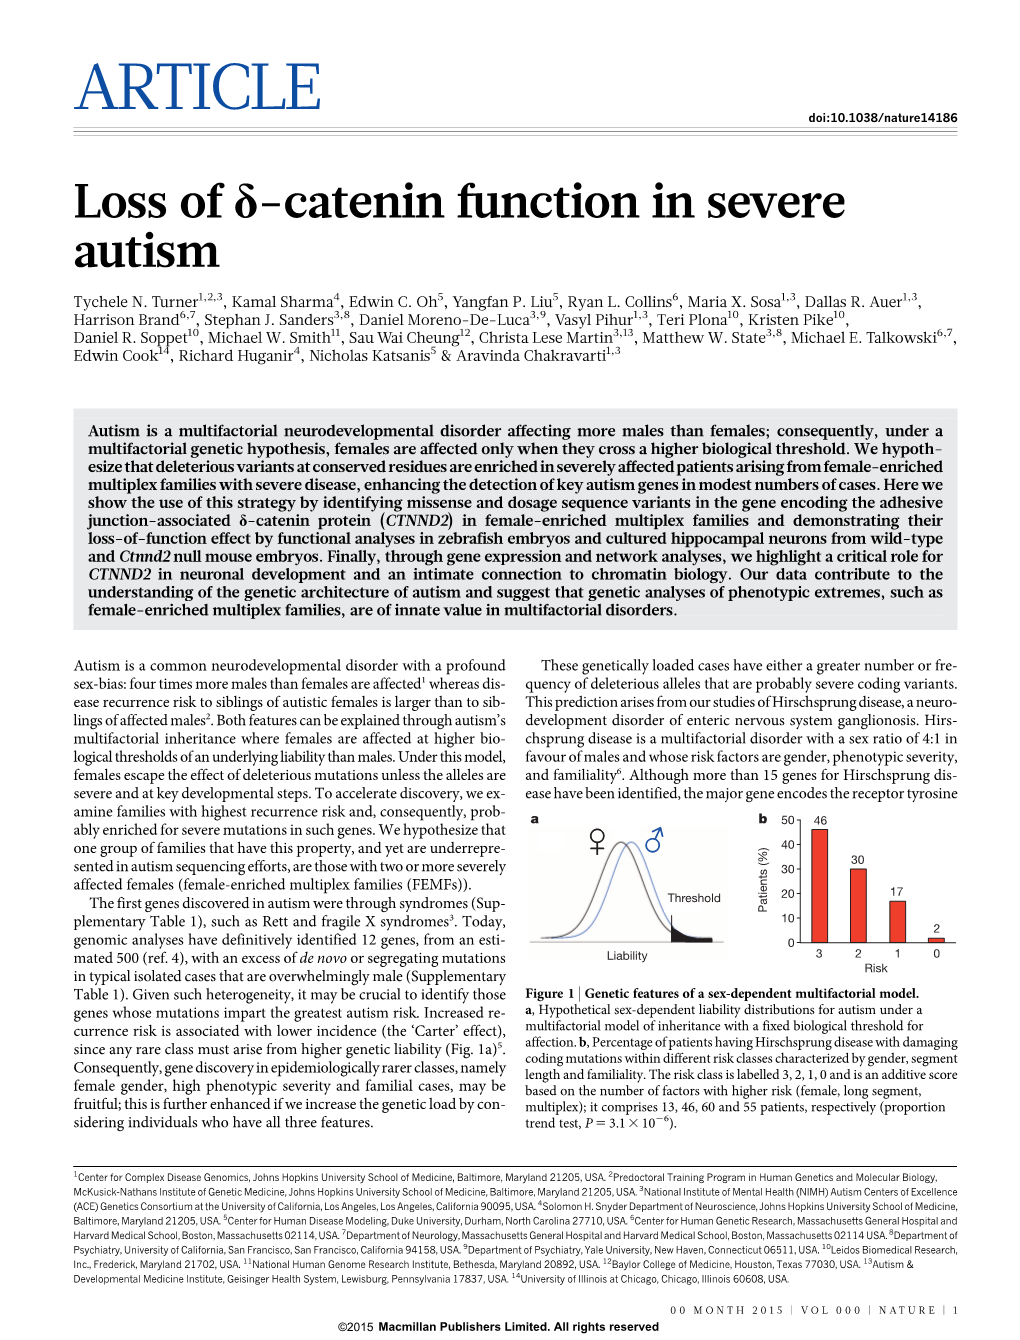 Loss of Δ-Catenin Function in Severe Autism